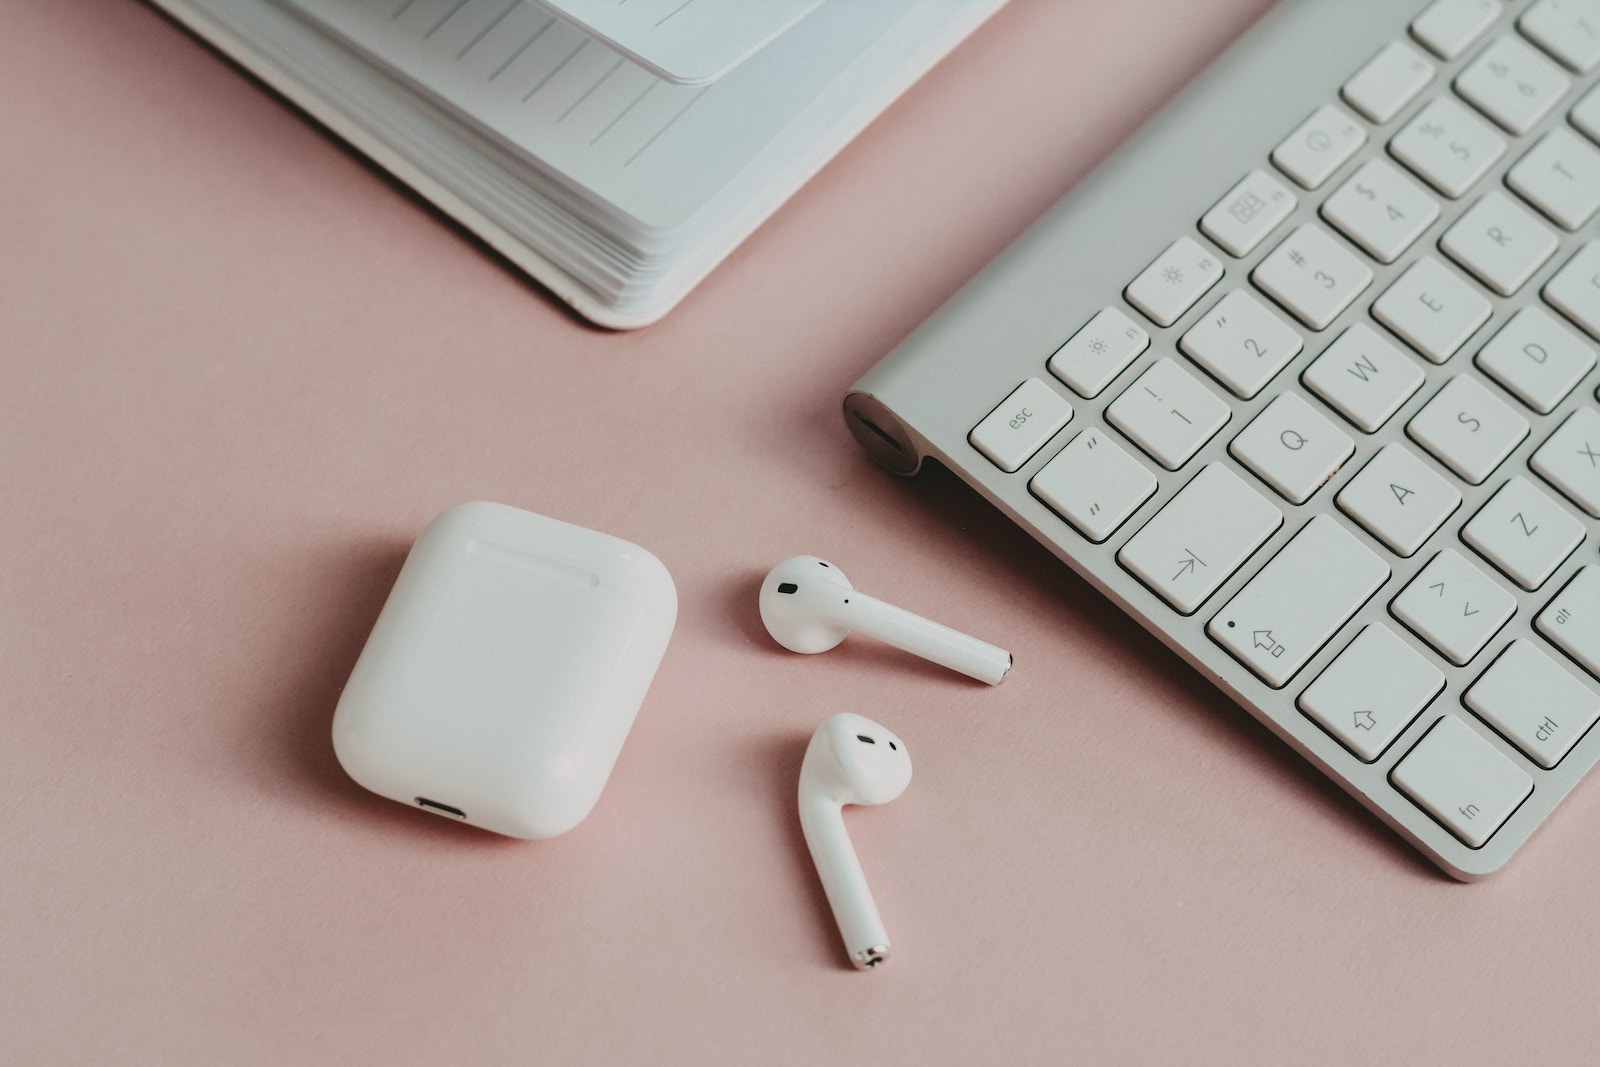 
Can AirPods Be Returned? Here's What You Need to Know